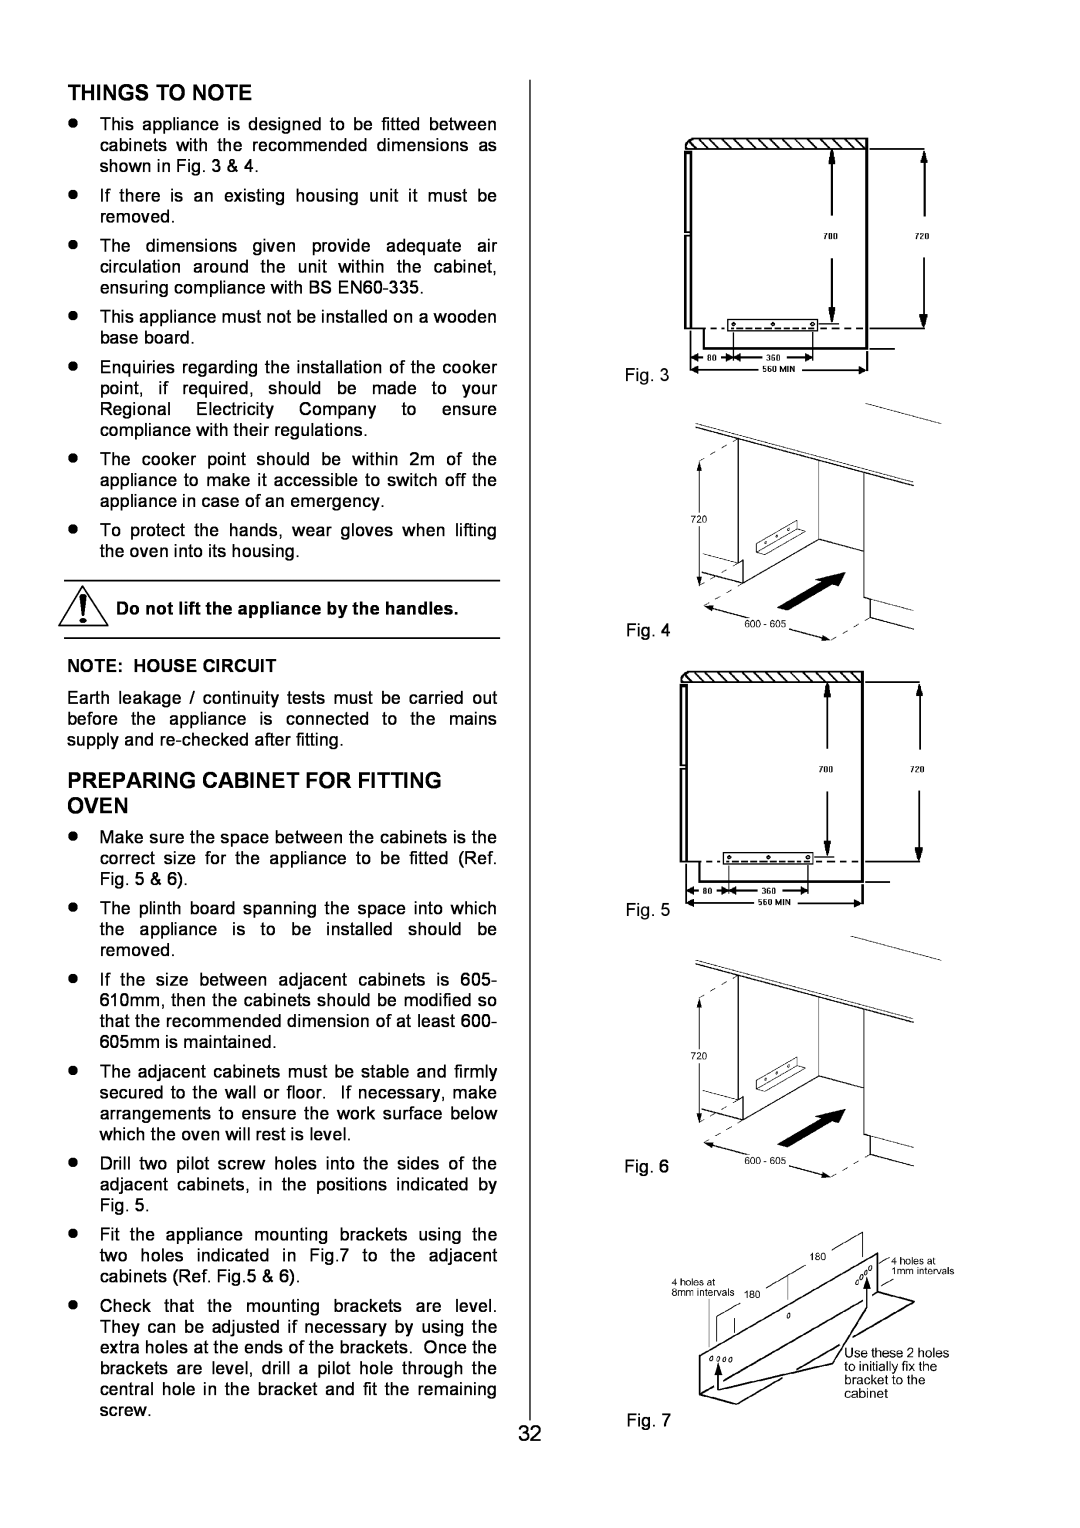 AEG U3100-4 manual Preparing Cabinet For Fitting Oven, Do not lift the appliance by the handles NOTE HOUSE CIRCUIT 